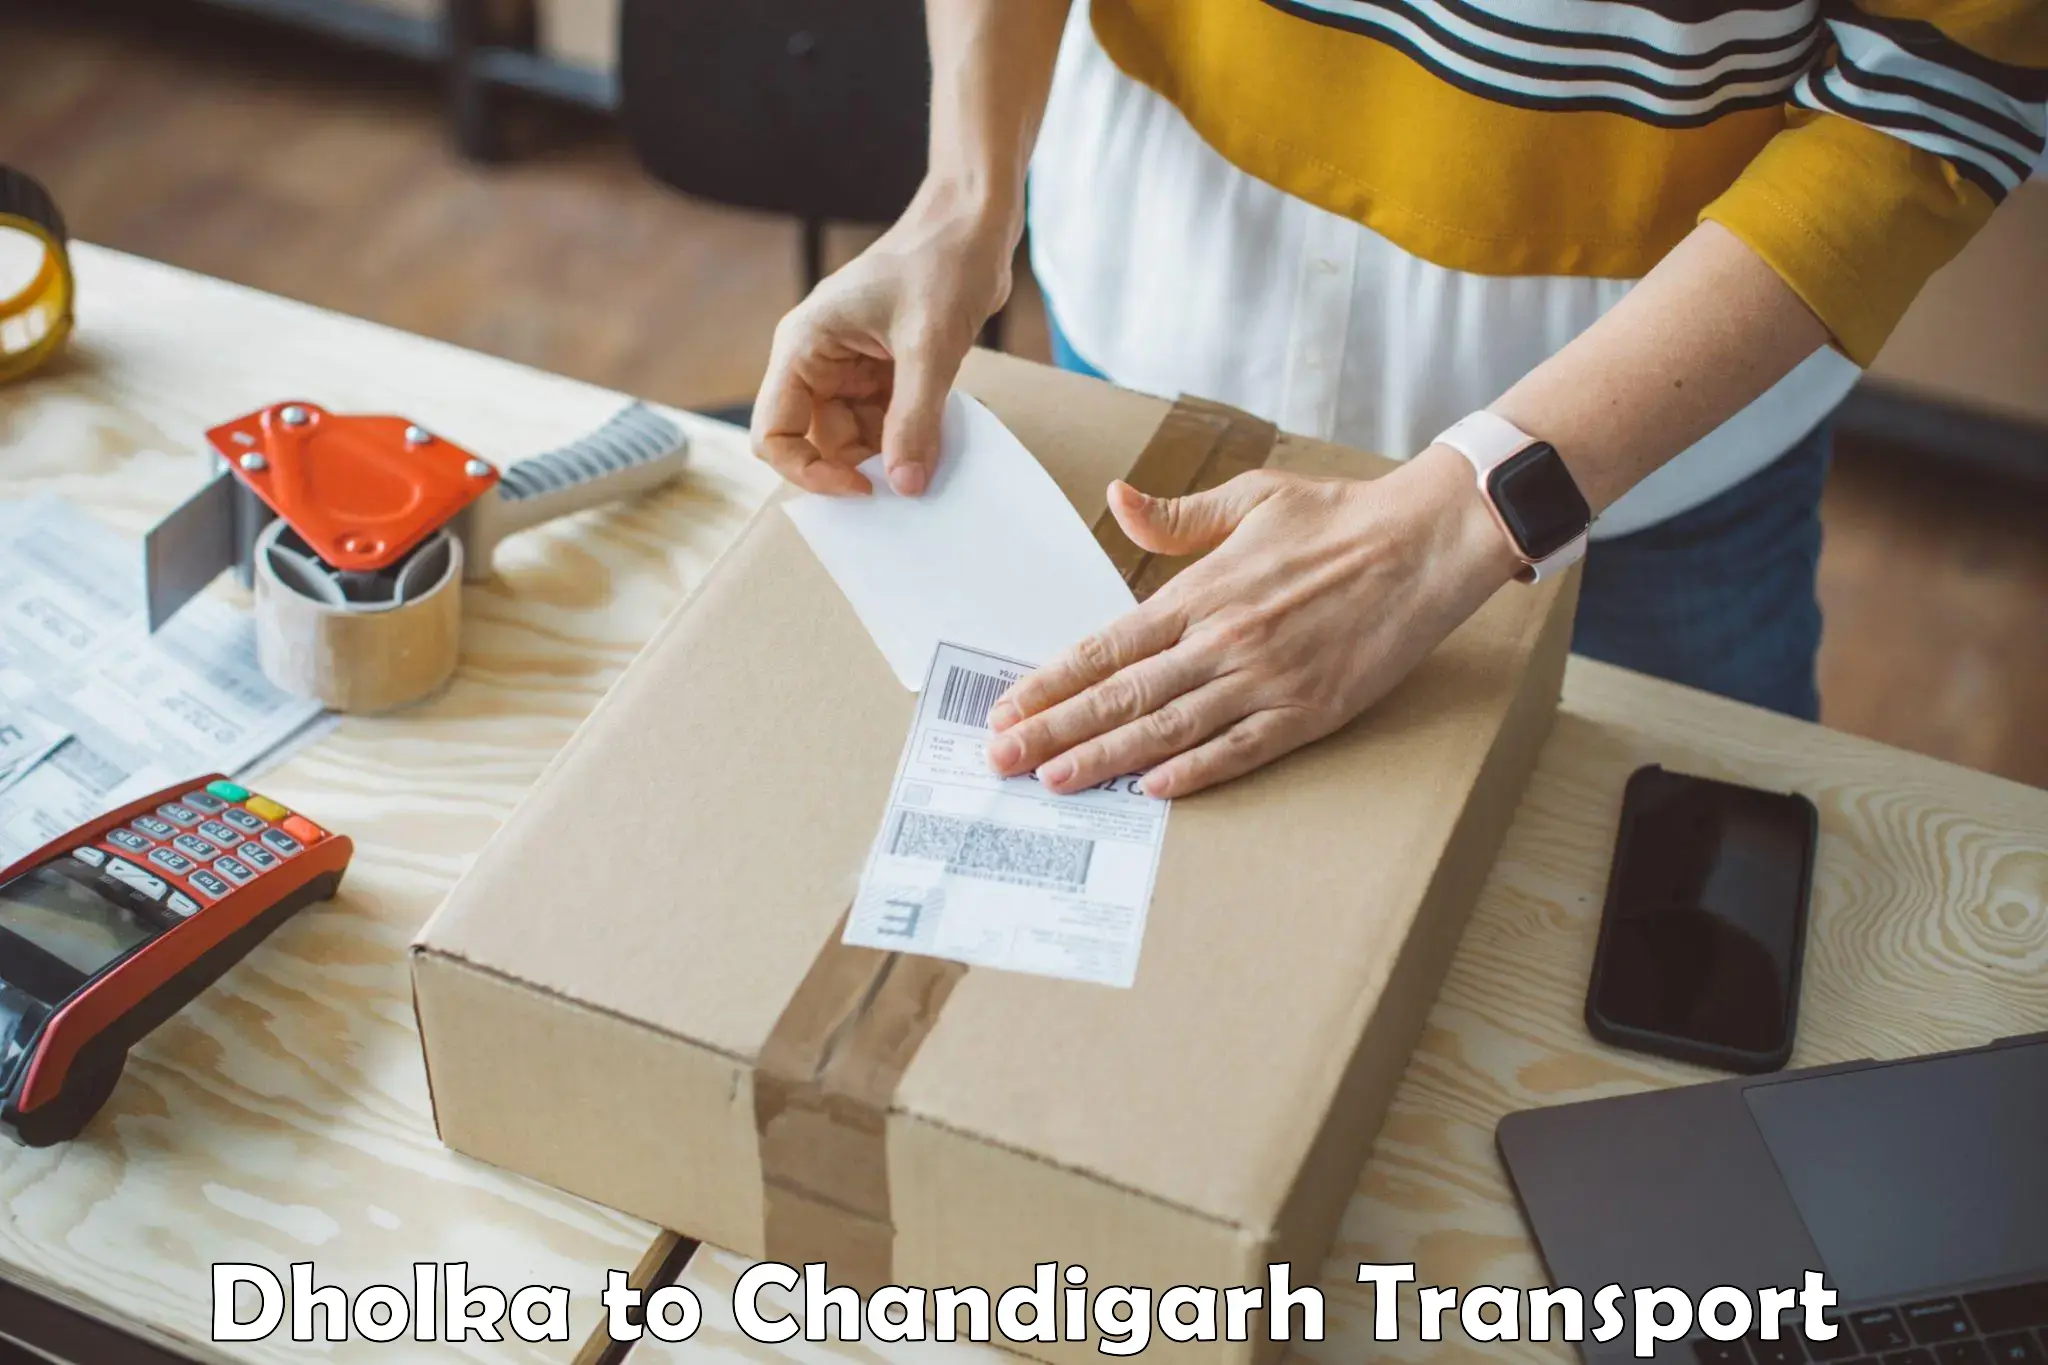 Nationwide transport services Dholka to Chandigarh